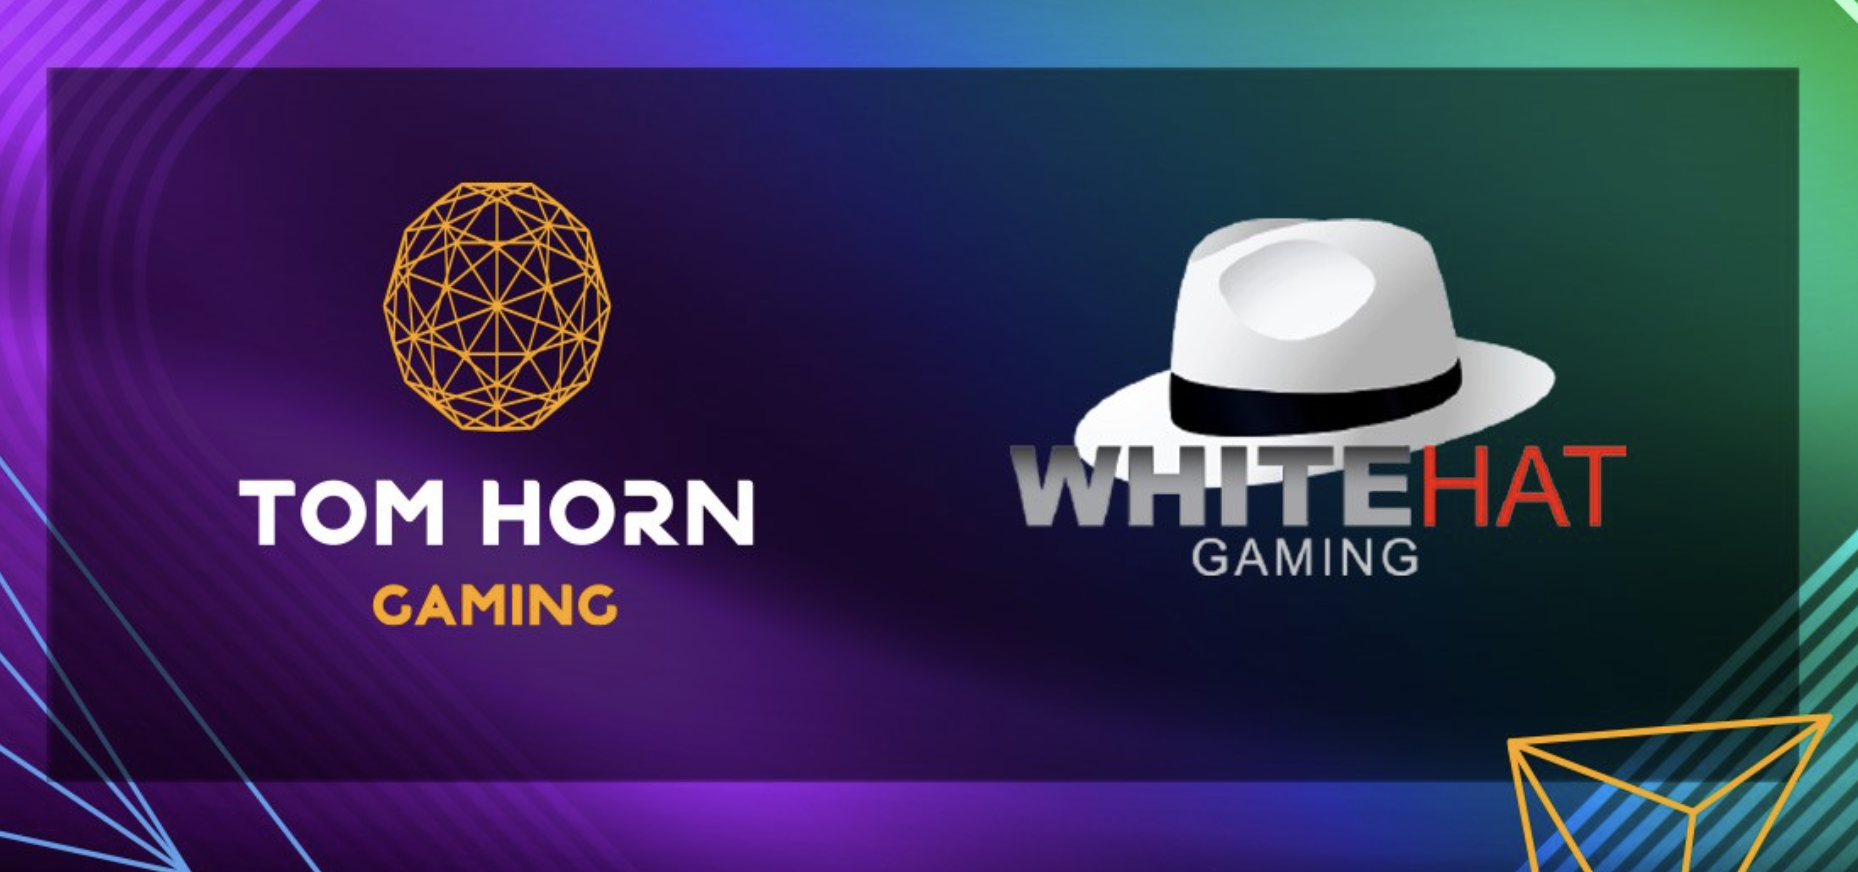 Tom Horn Gaming Signs Content Deal with White Hat Gaming